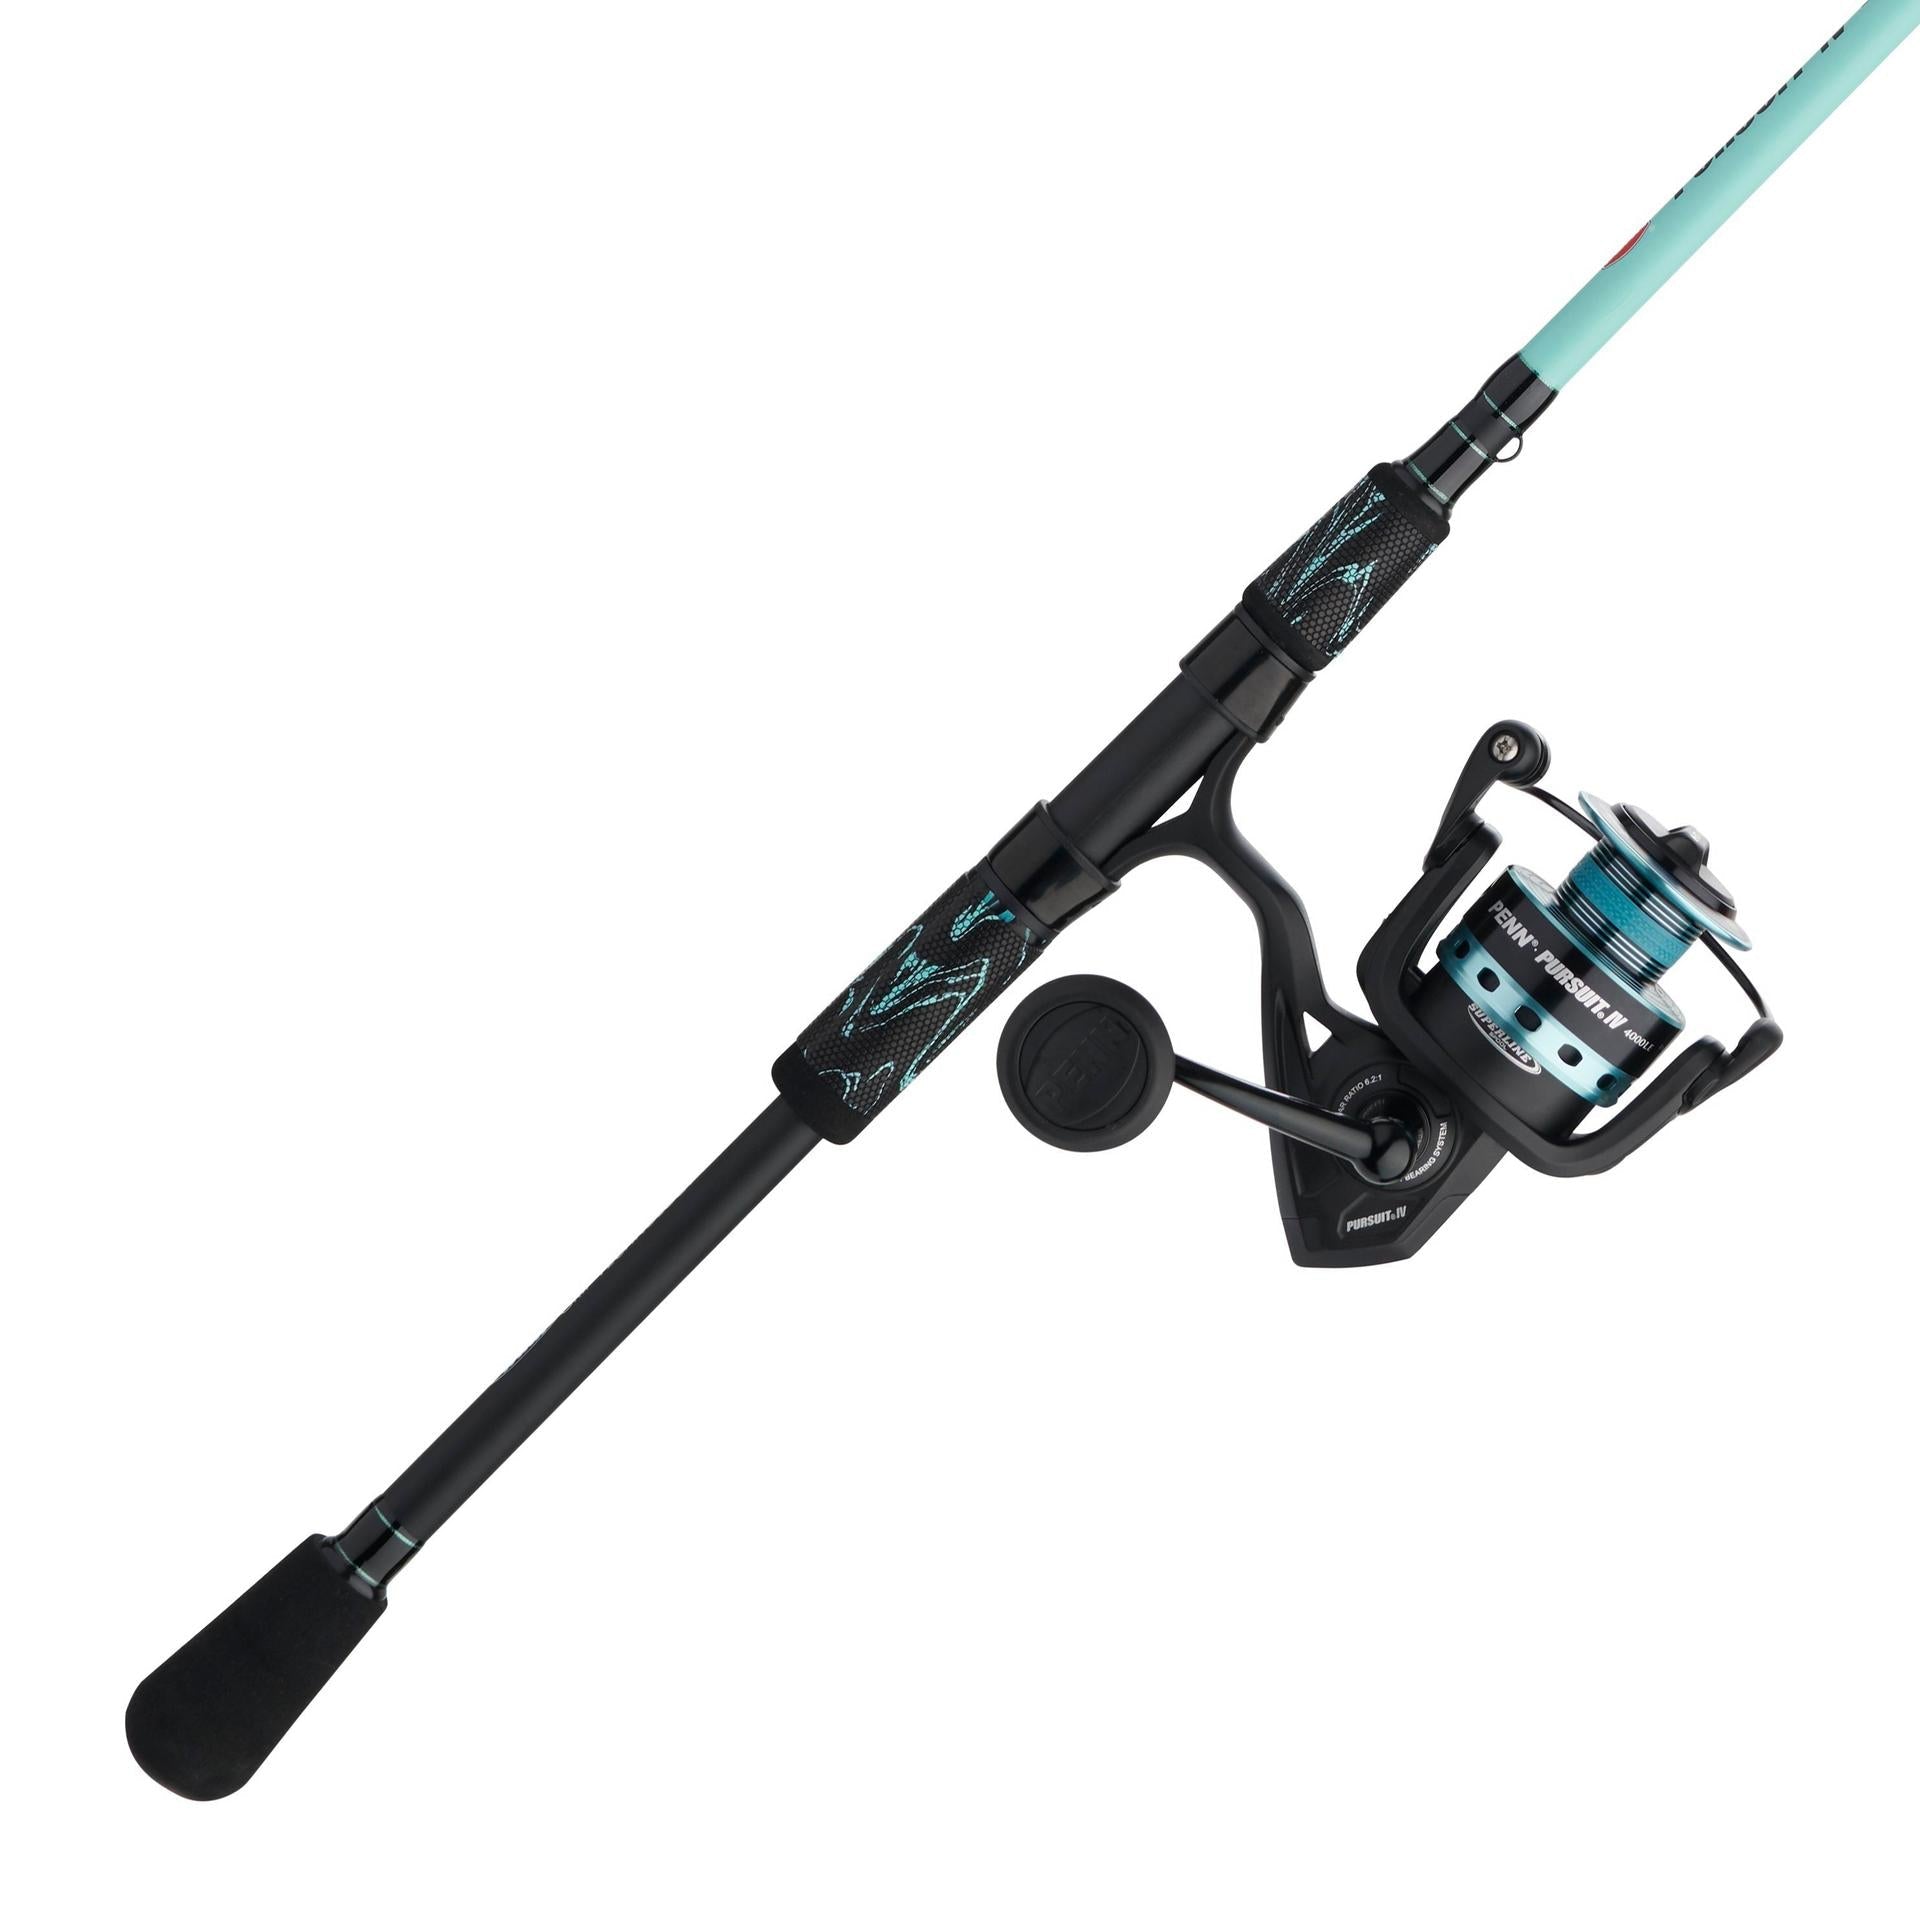 Pursuit® IV Spinning Rod & Reel Combo